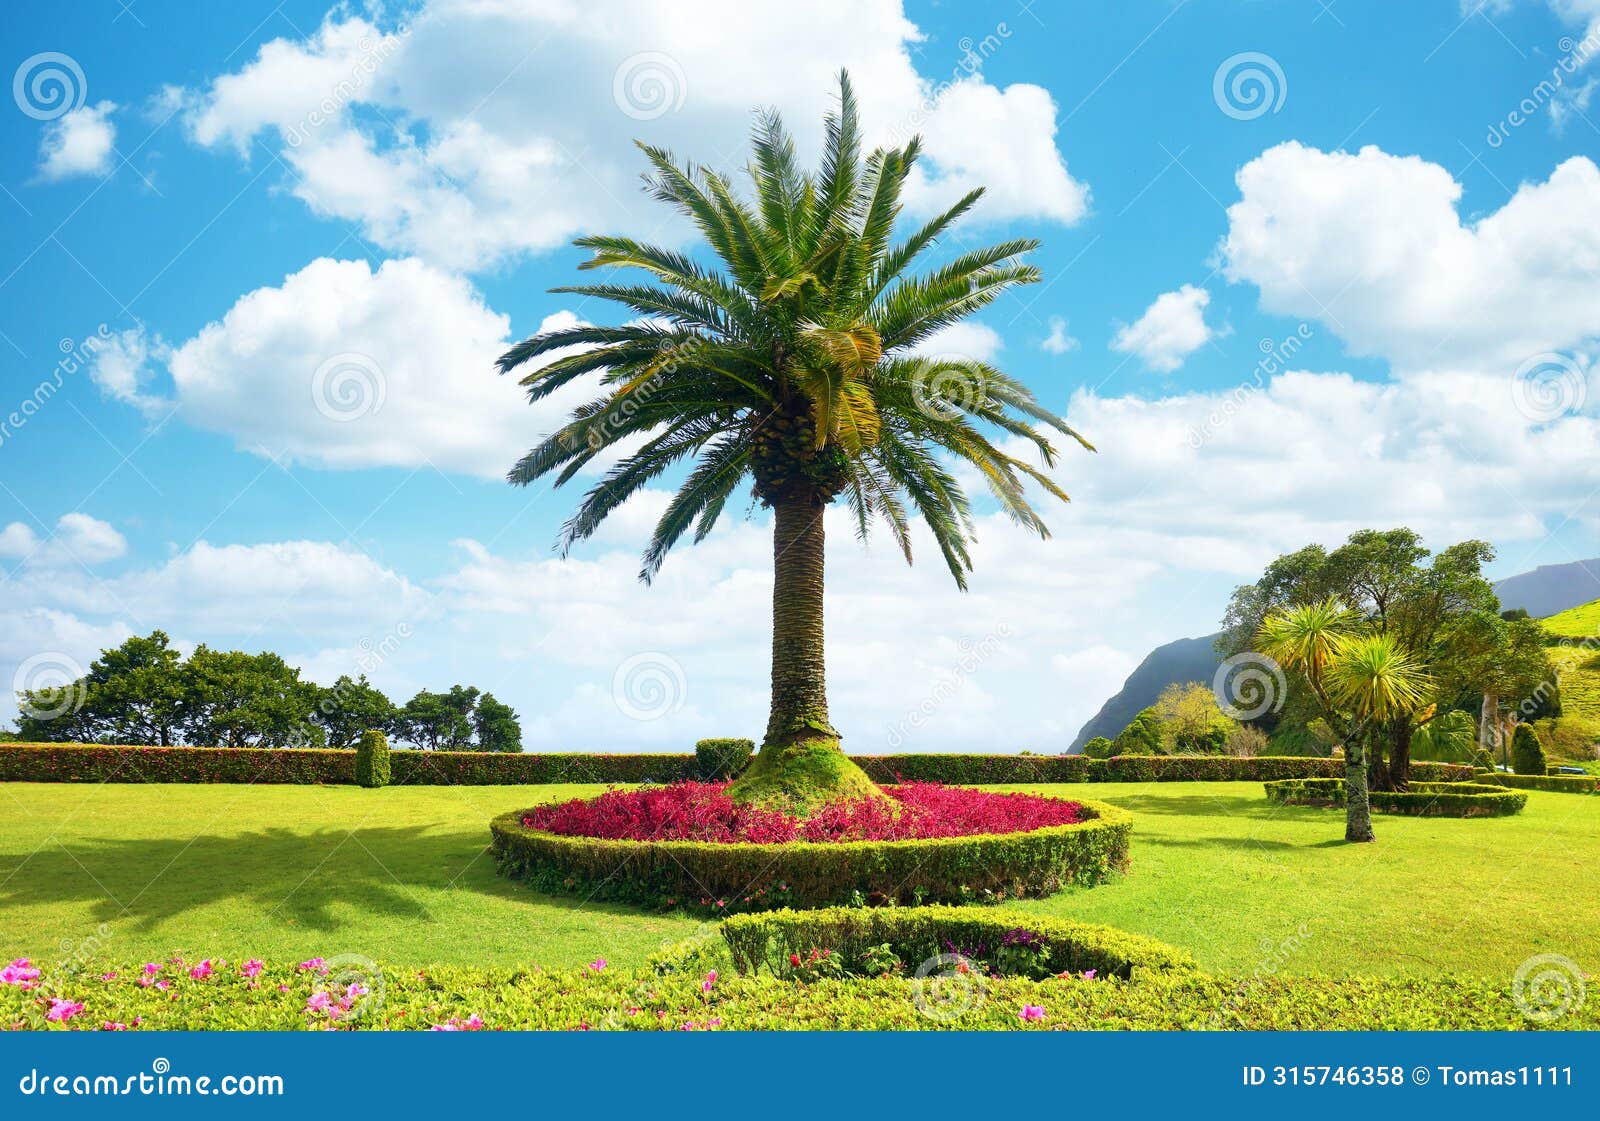 canary palm in the garden of the miradouro of ponta do sossego on the island of sao miguel in the azores archipelago